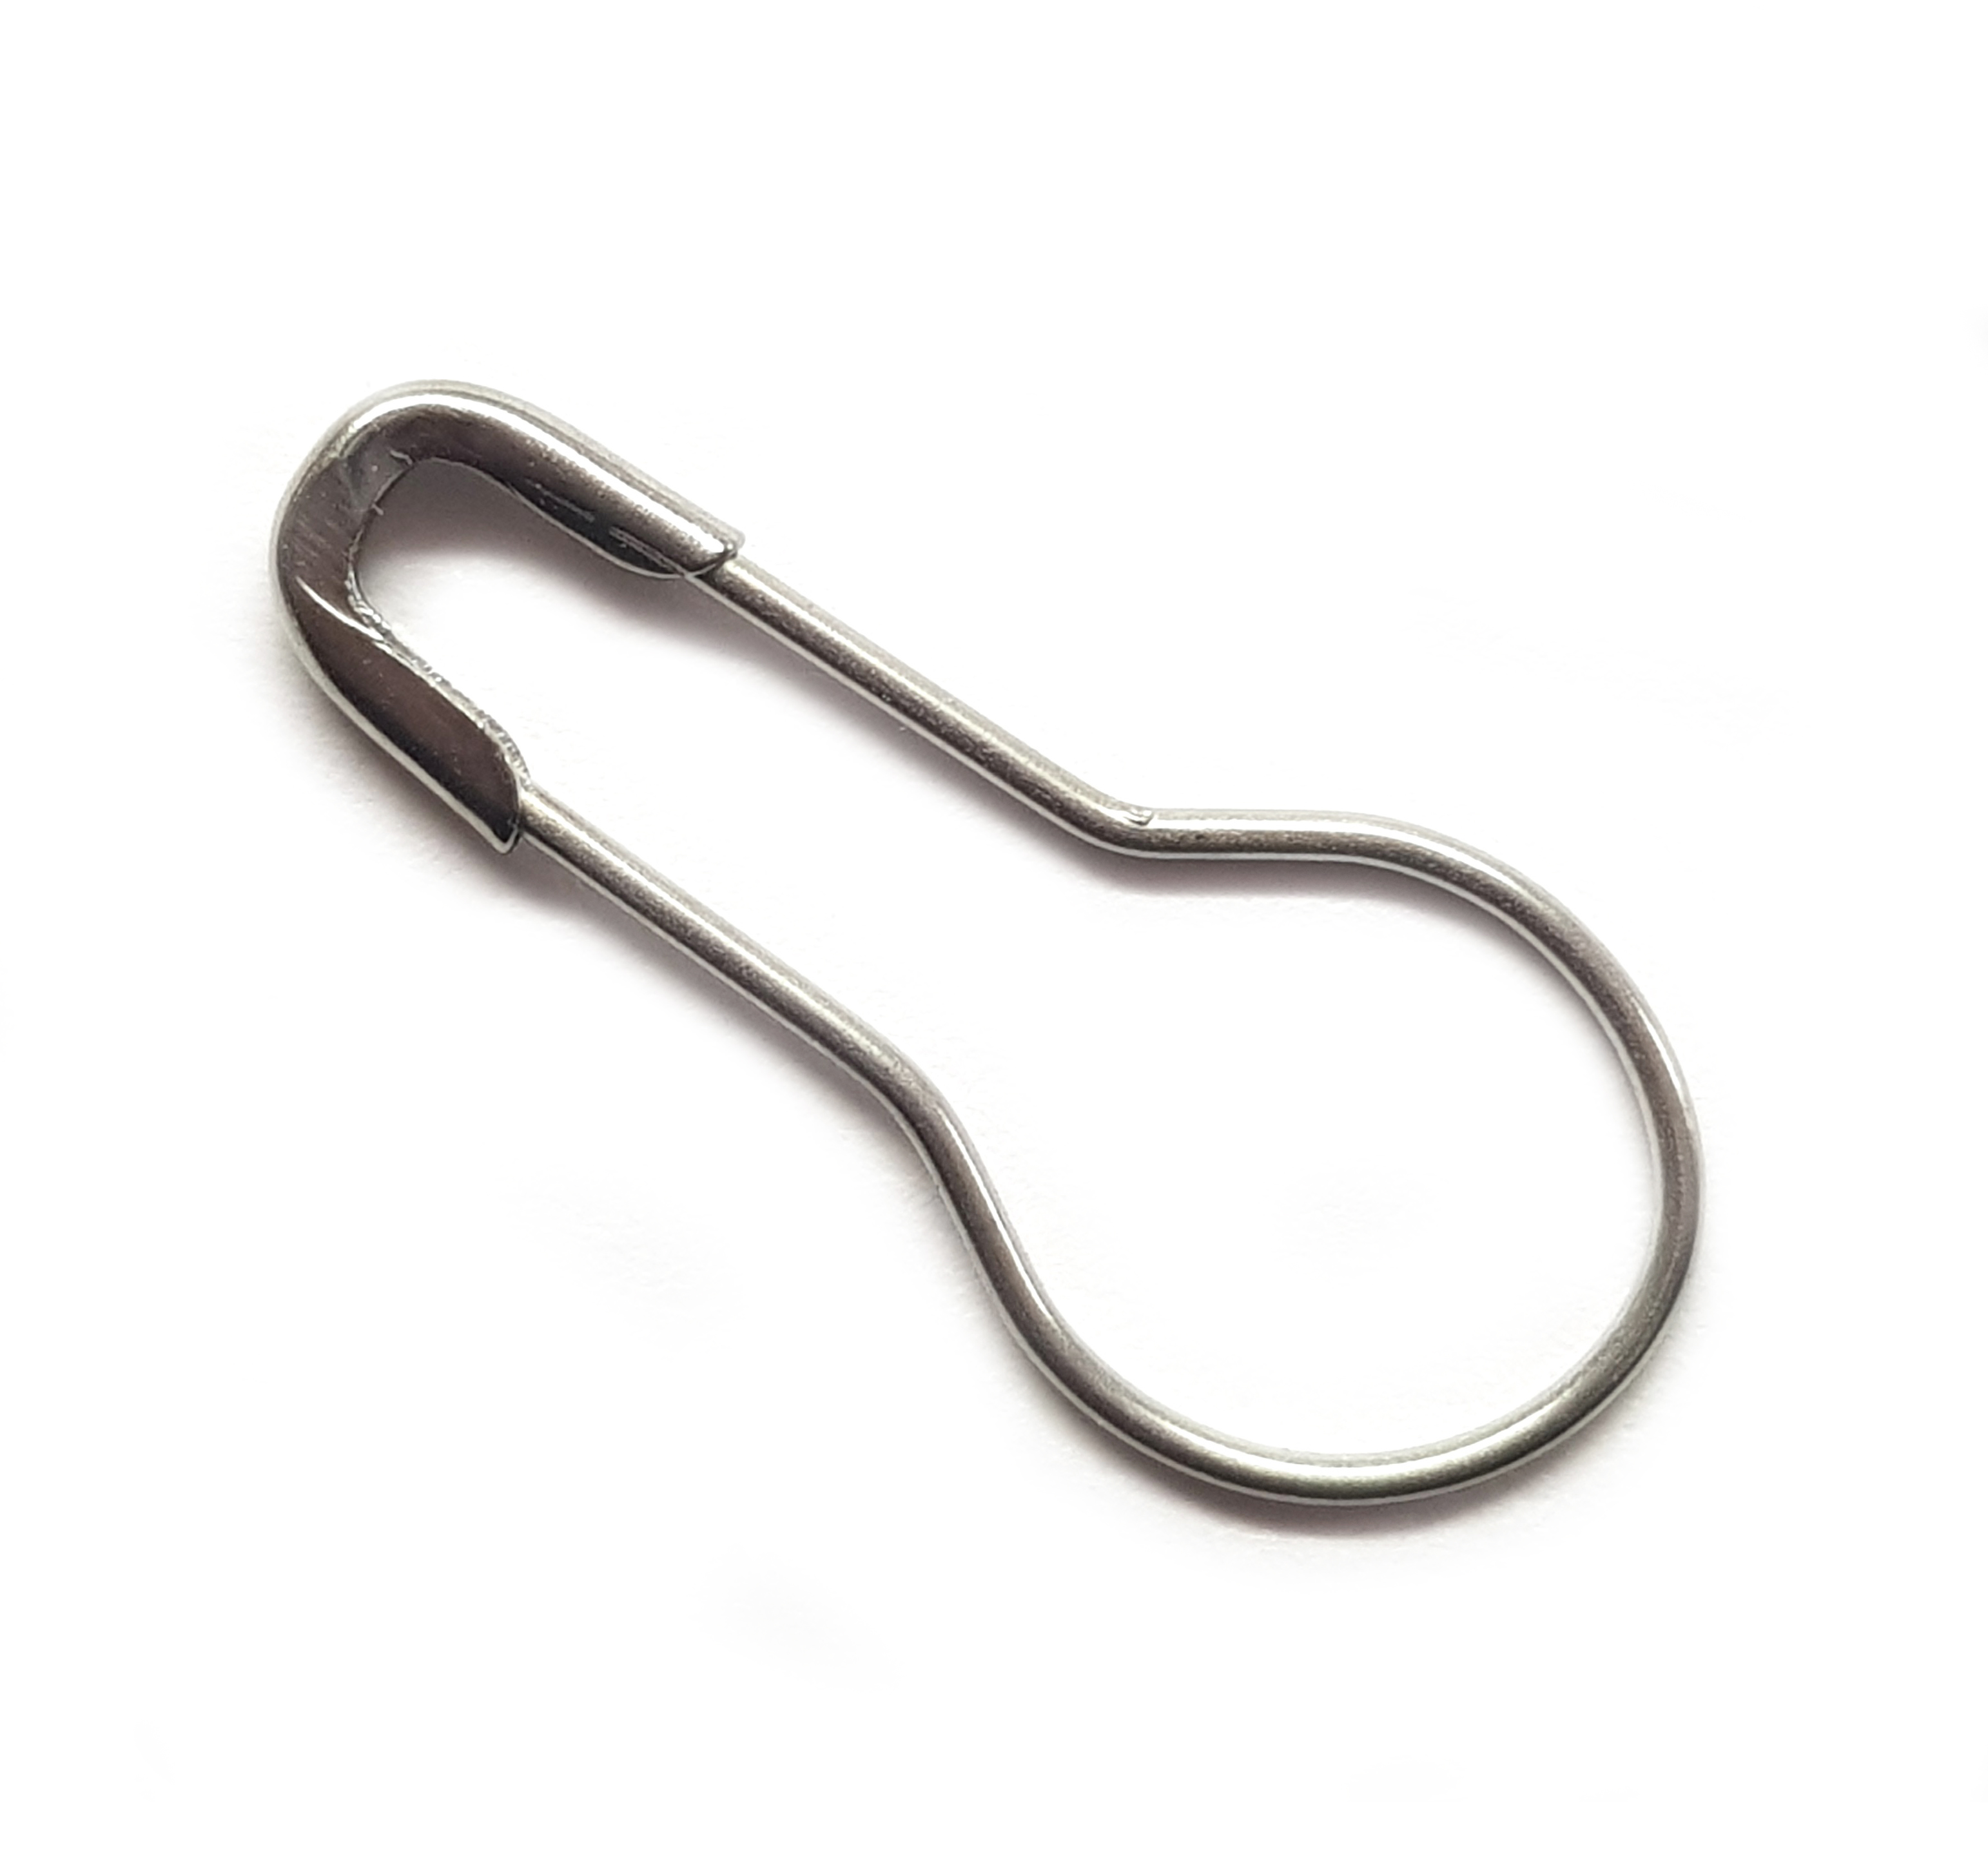 22mm Silver Pear Shaped Safety Pins